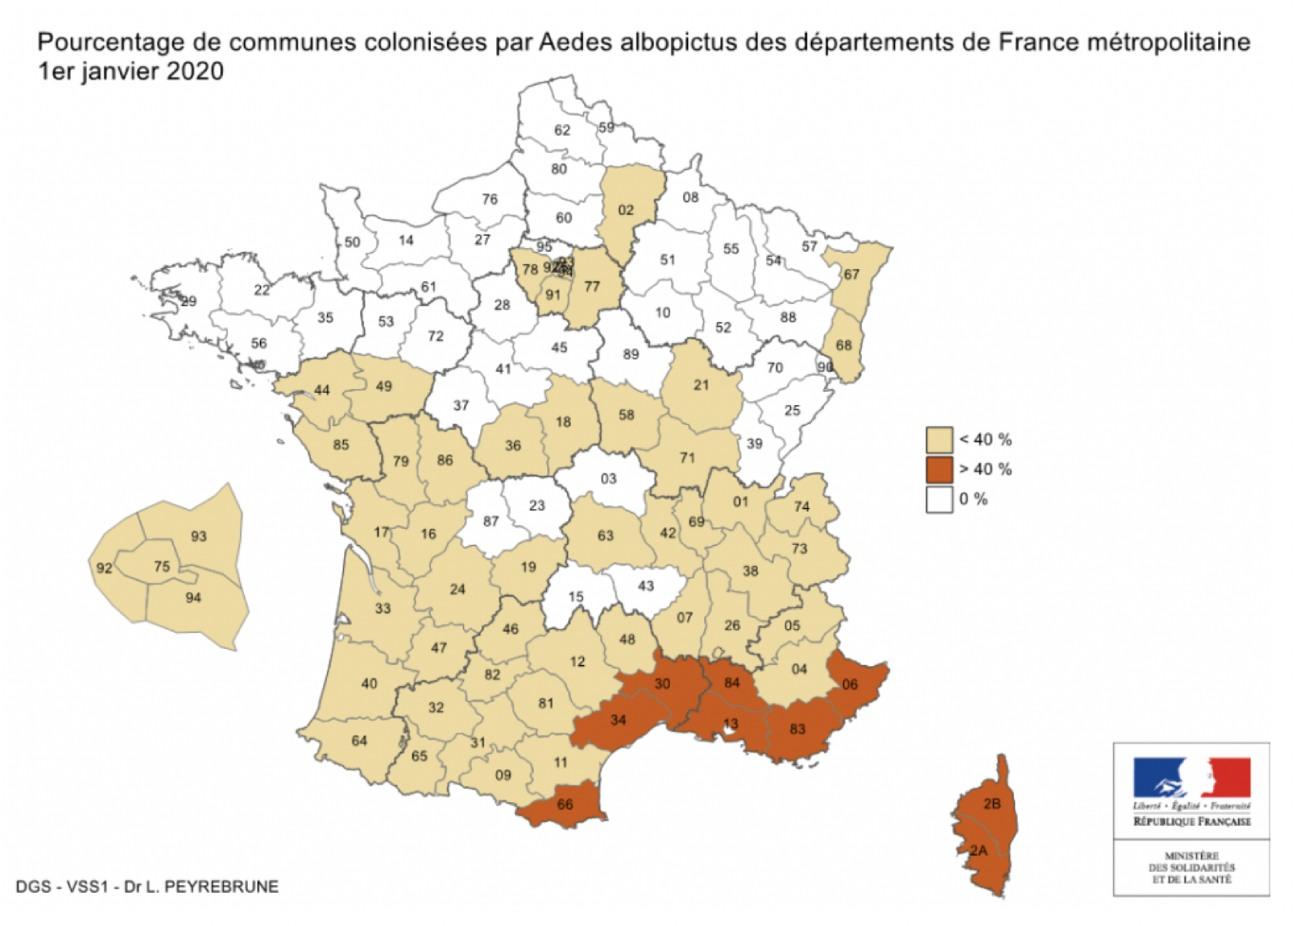 Tiger mosquito in France: 58 départements on red alert - Institut Pasteur